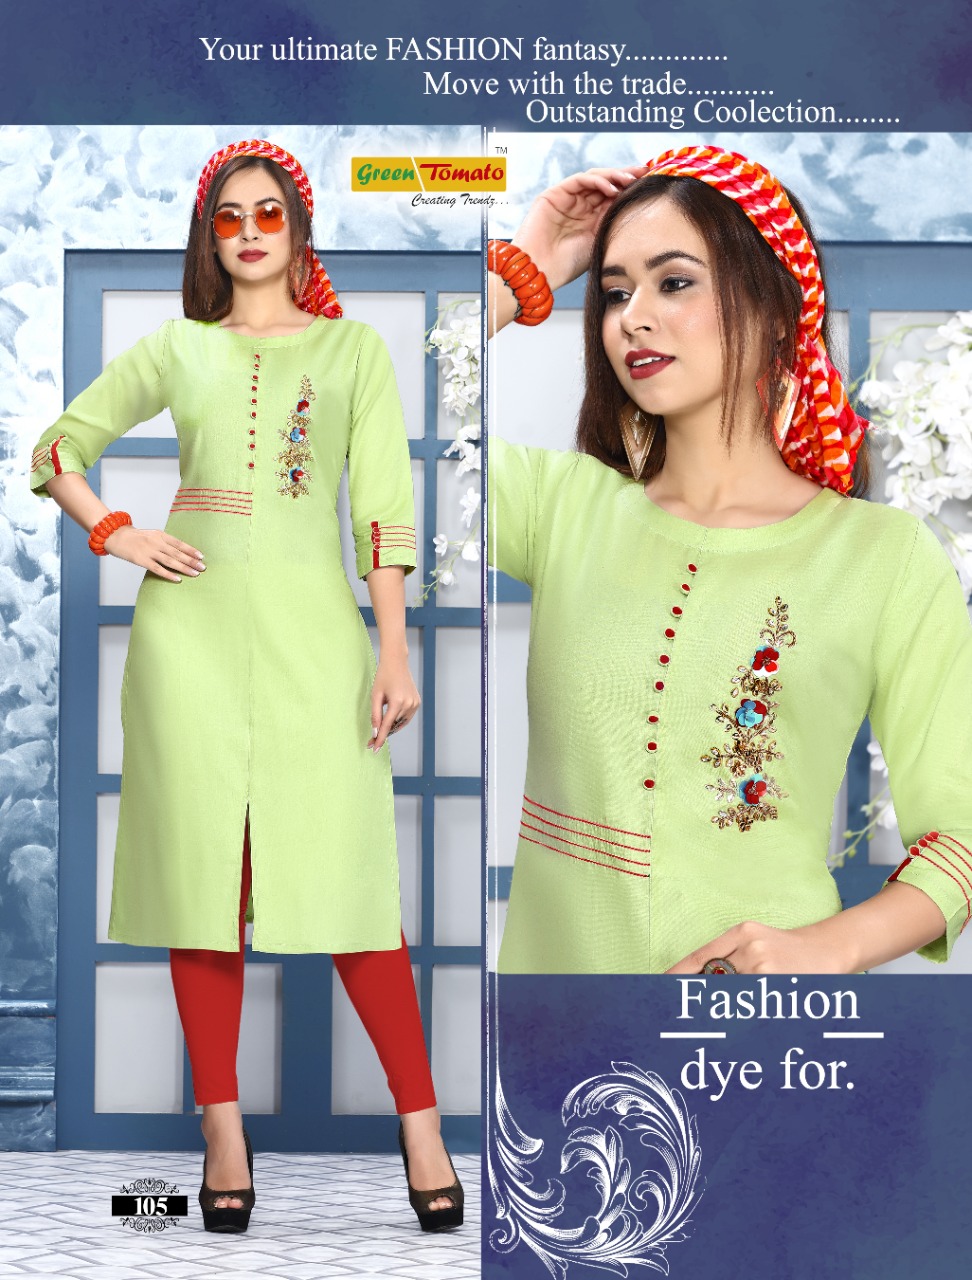 Green tomato Simran classy catchy look Kurties in wholesale